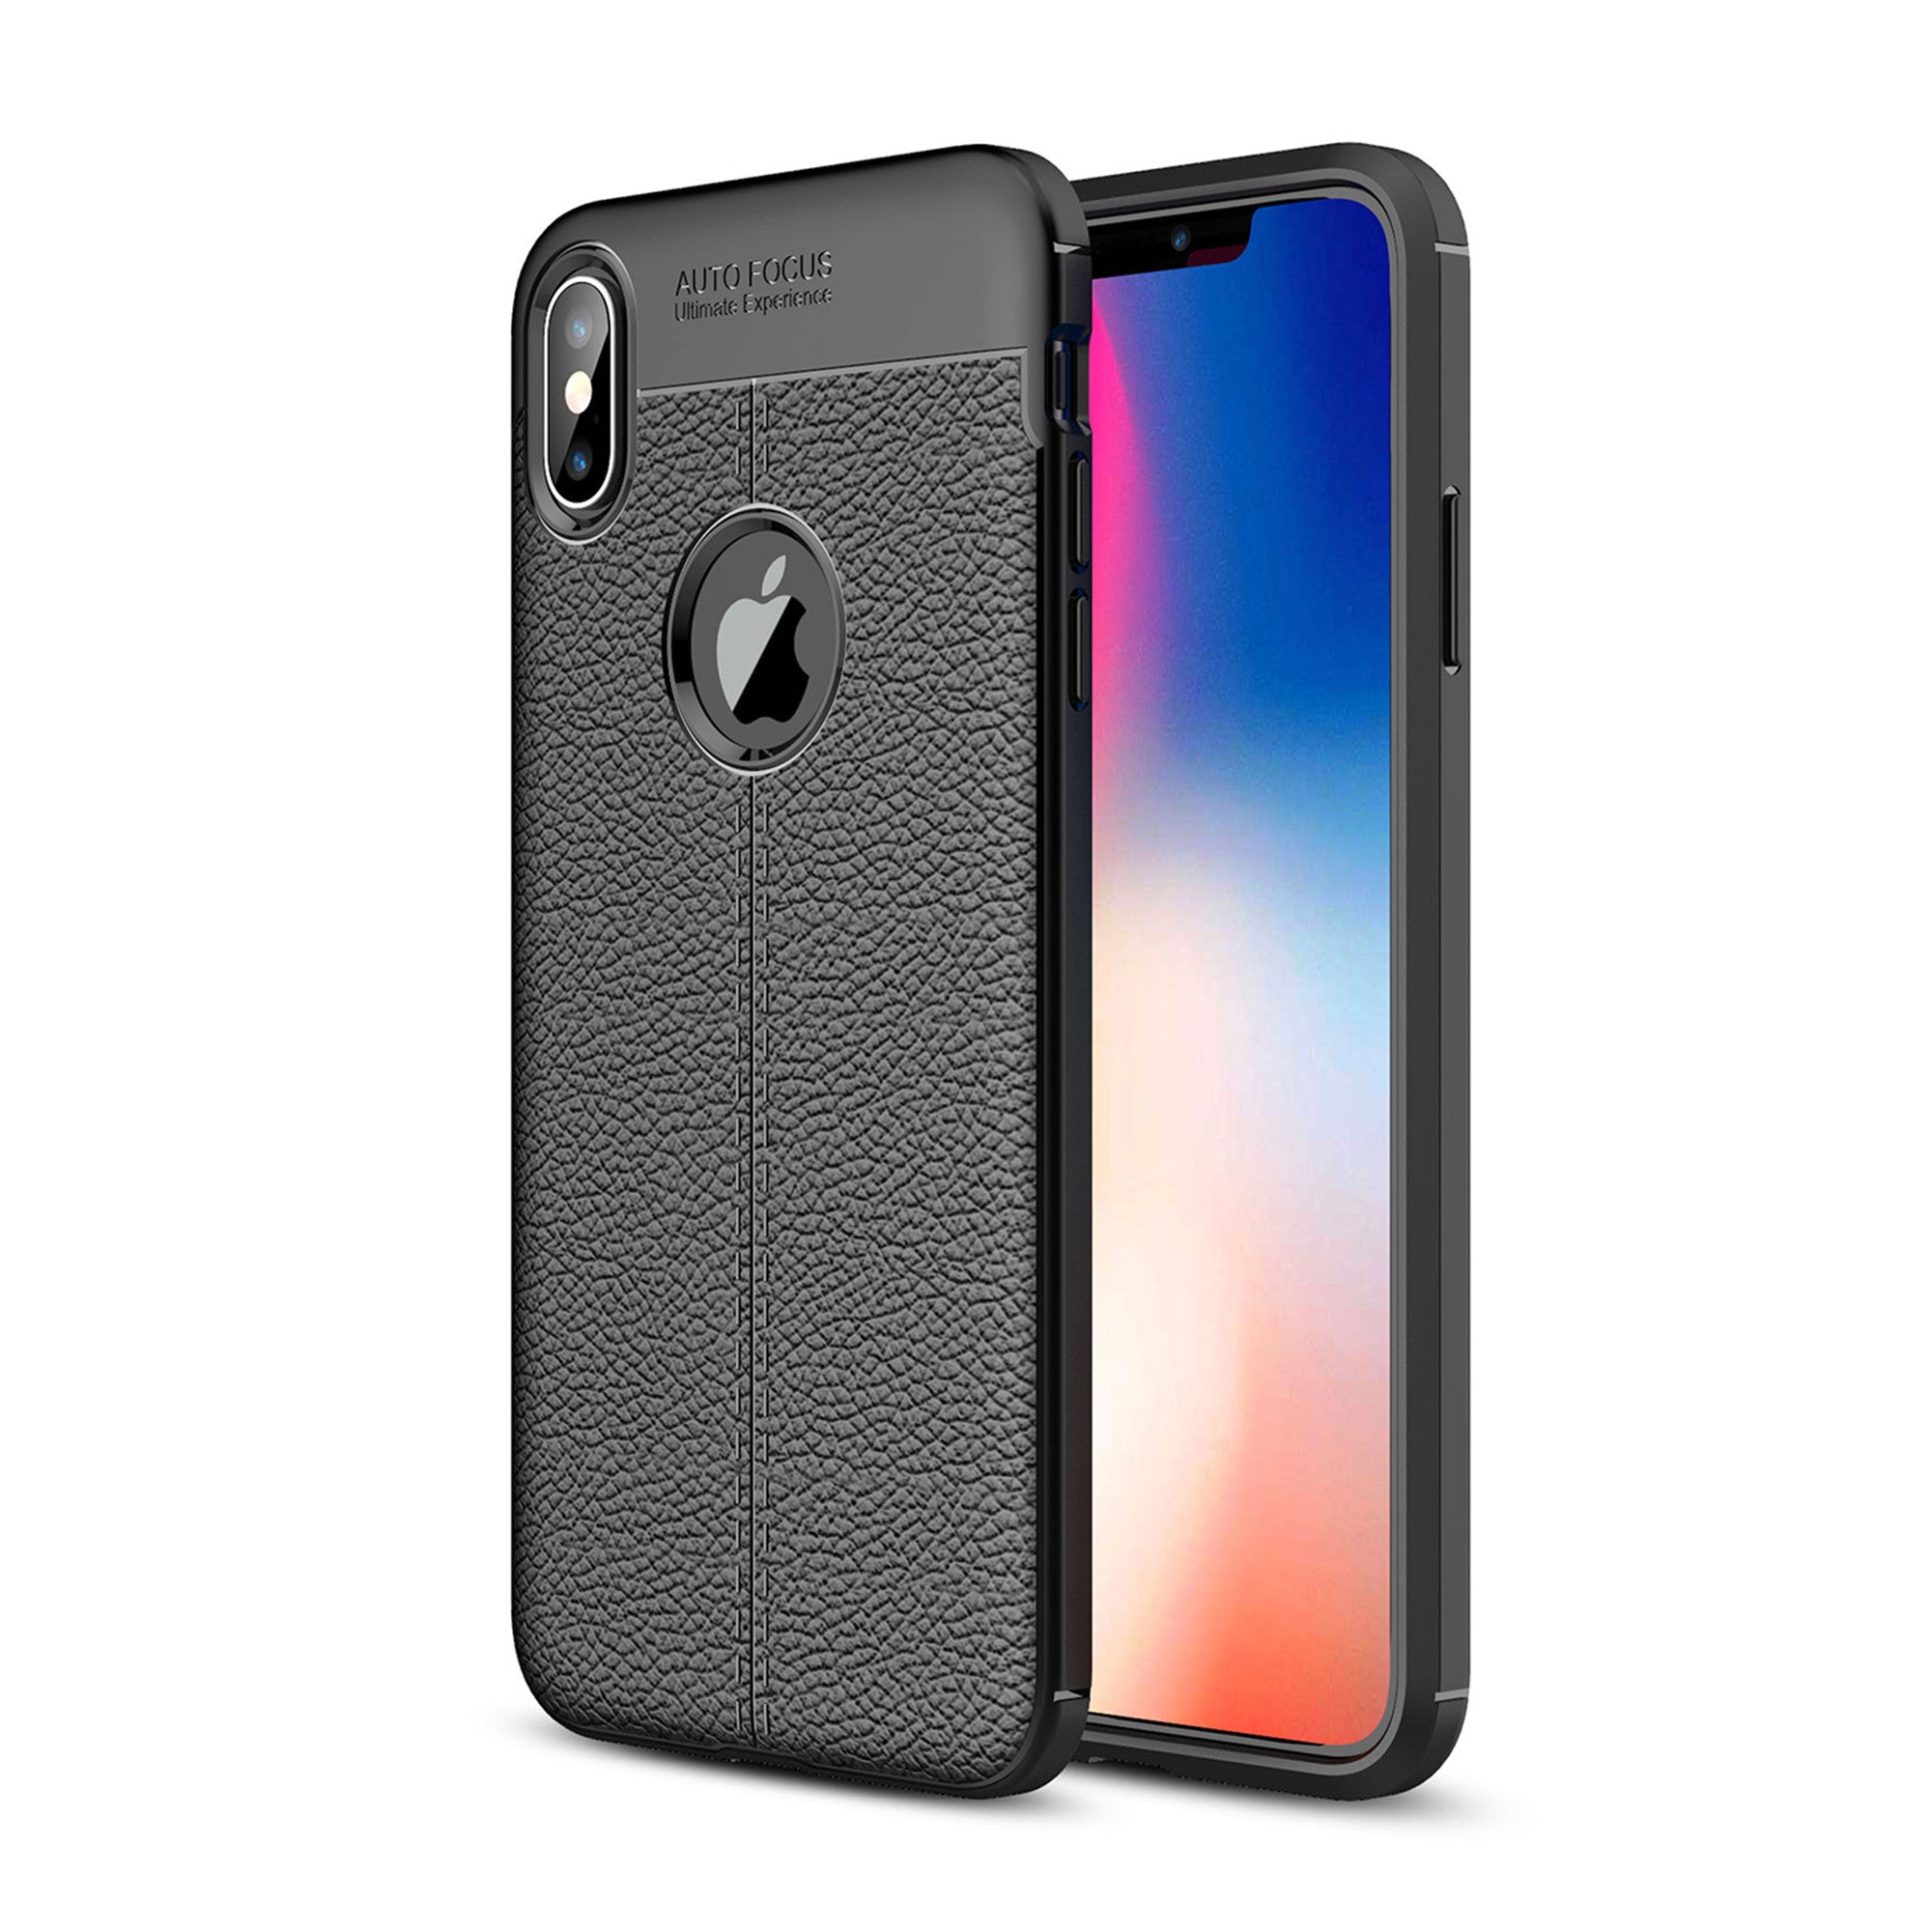 Luvvitt Case for iPhone XS Max TPU Flexible Protection 6.5" Screen 2018 - Black